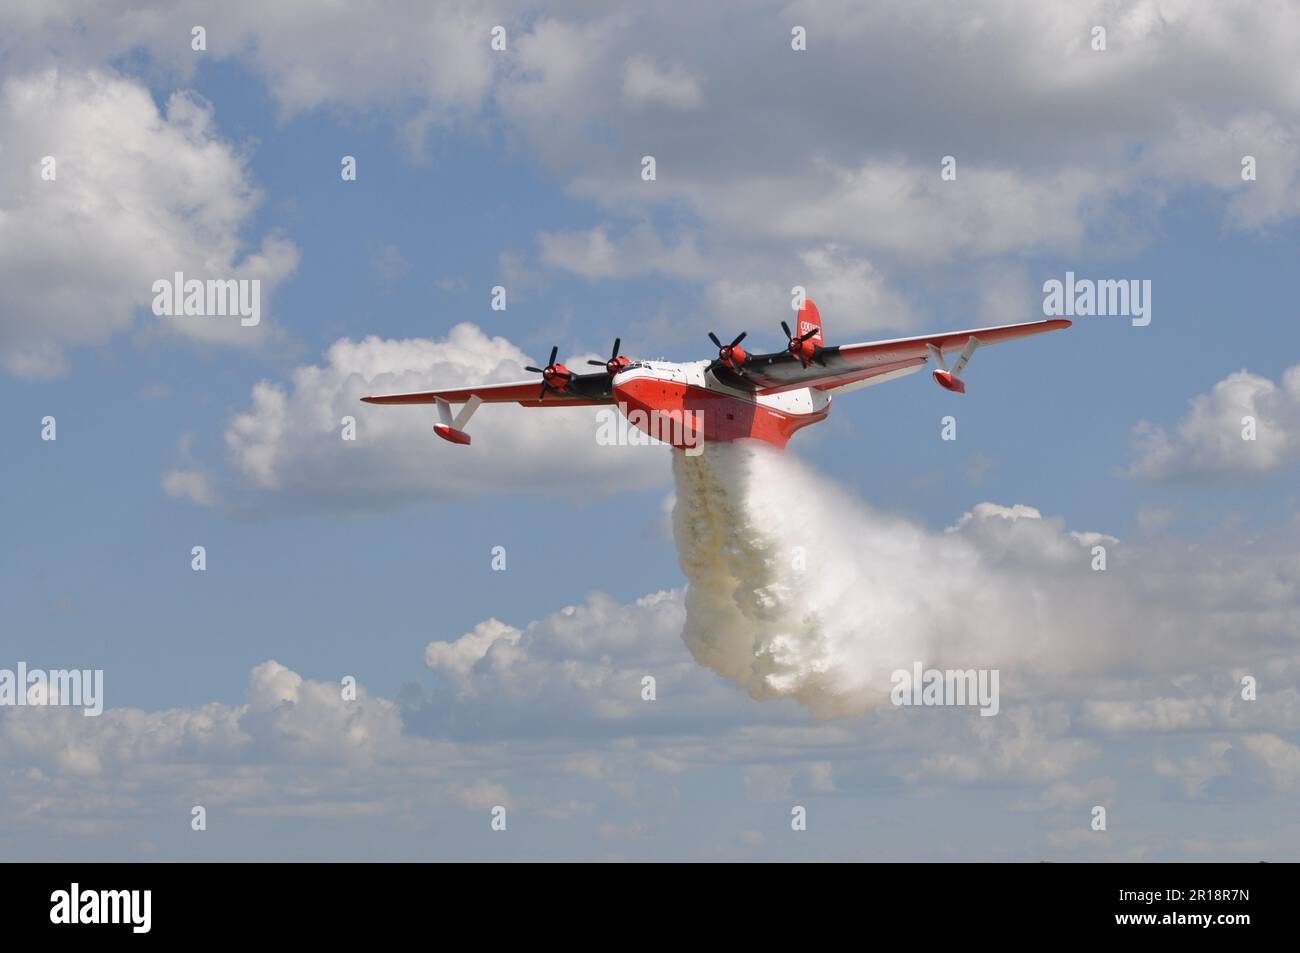 World's largest flying boat dropping water, 77 year old, fights forest fires Stock Photo